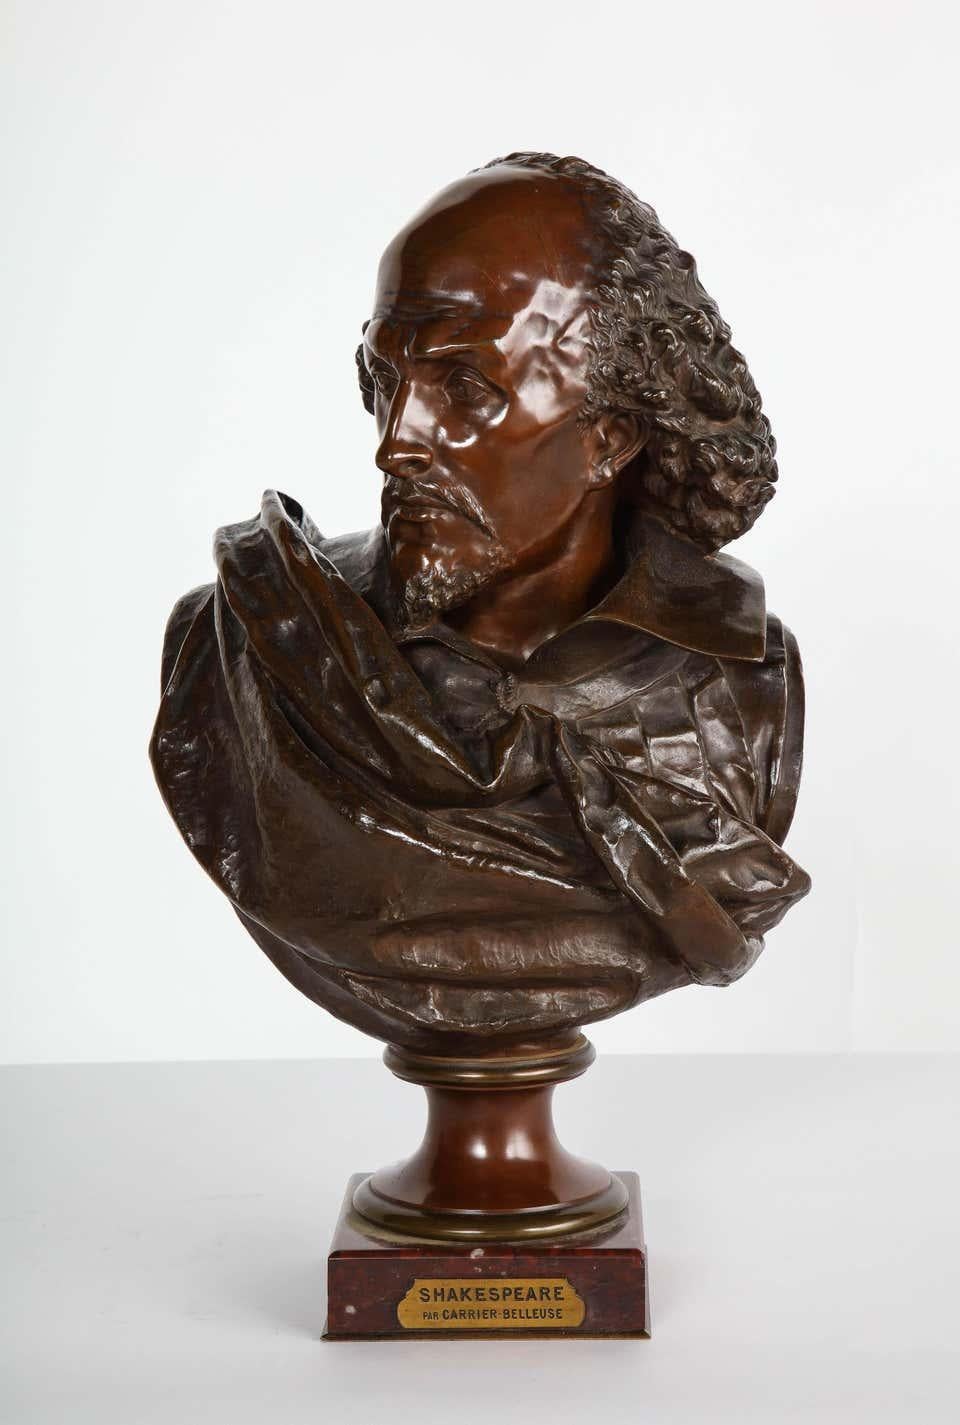 Rare French Bronze Bust of William Shakespeare by Carrier Belleuse and Pinedo 16